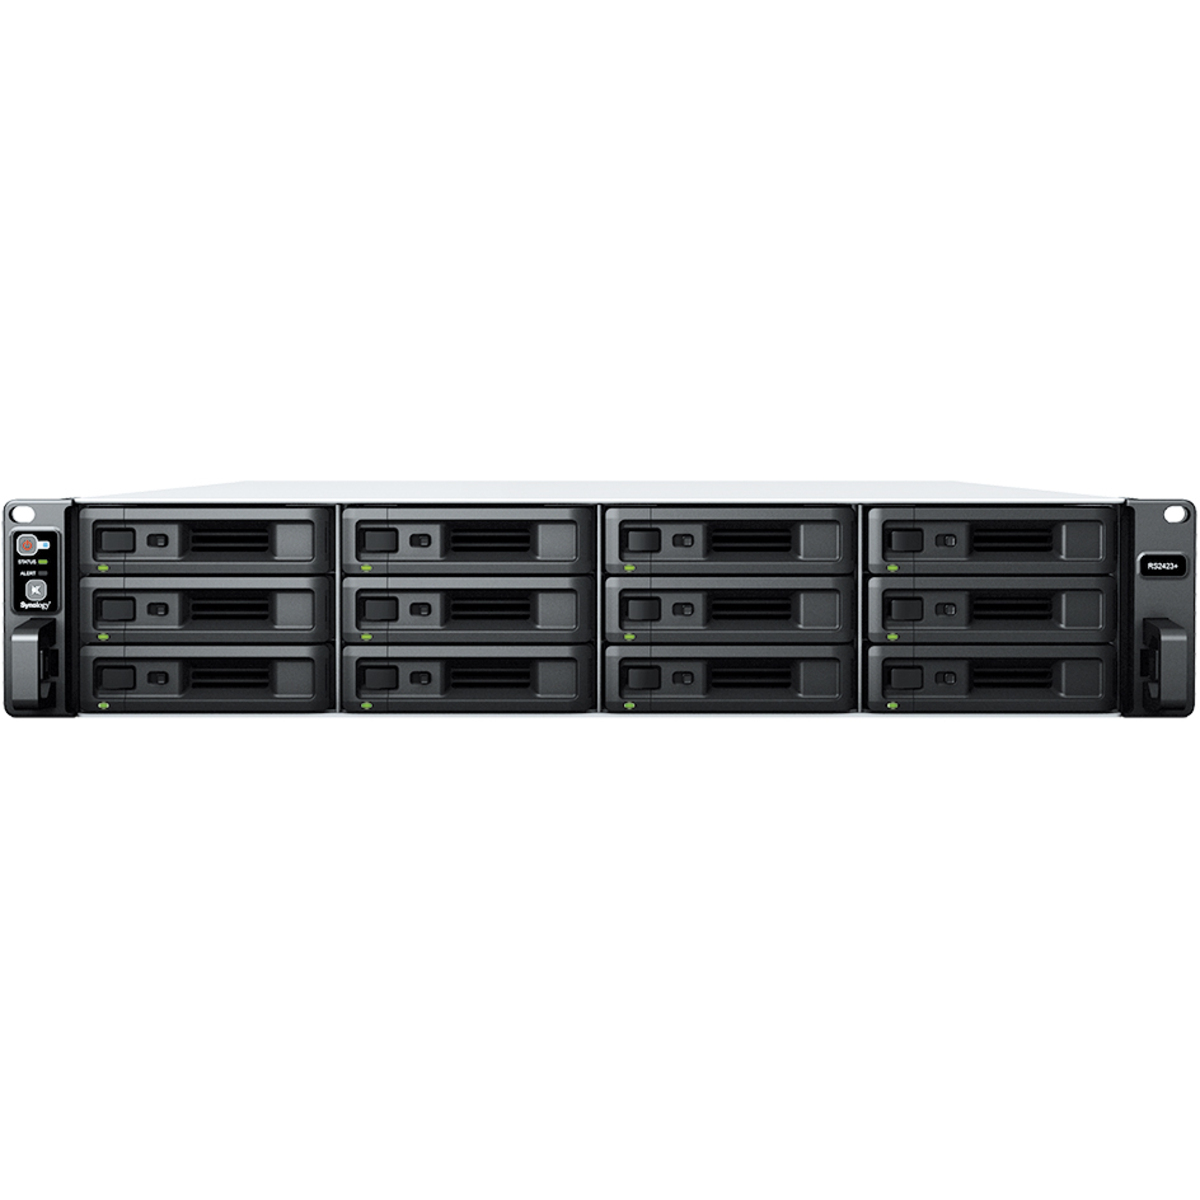 Synology RackStation RS2423+ 8tb 12-Bay RackMount Multimedia / Power User / Business NAS - Network Attached Storage Device 8x1tb Samsung 870 EVO MZ-77E1T0BAM 2.5 560/530MB/s SATA 6Gb/s SSD CONSUMER Class Drives Installed - Burn-In Tested RackStation RS2423+